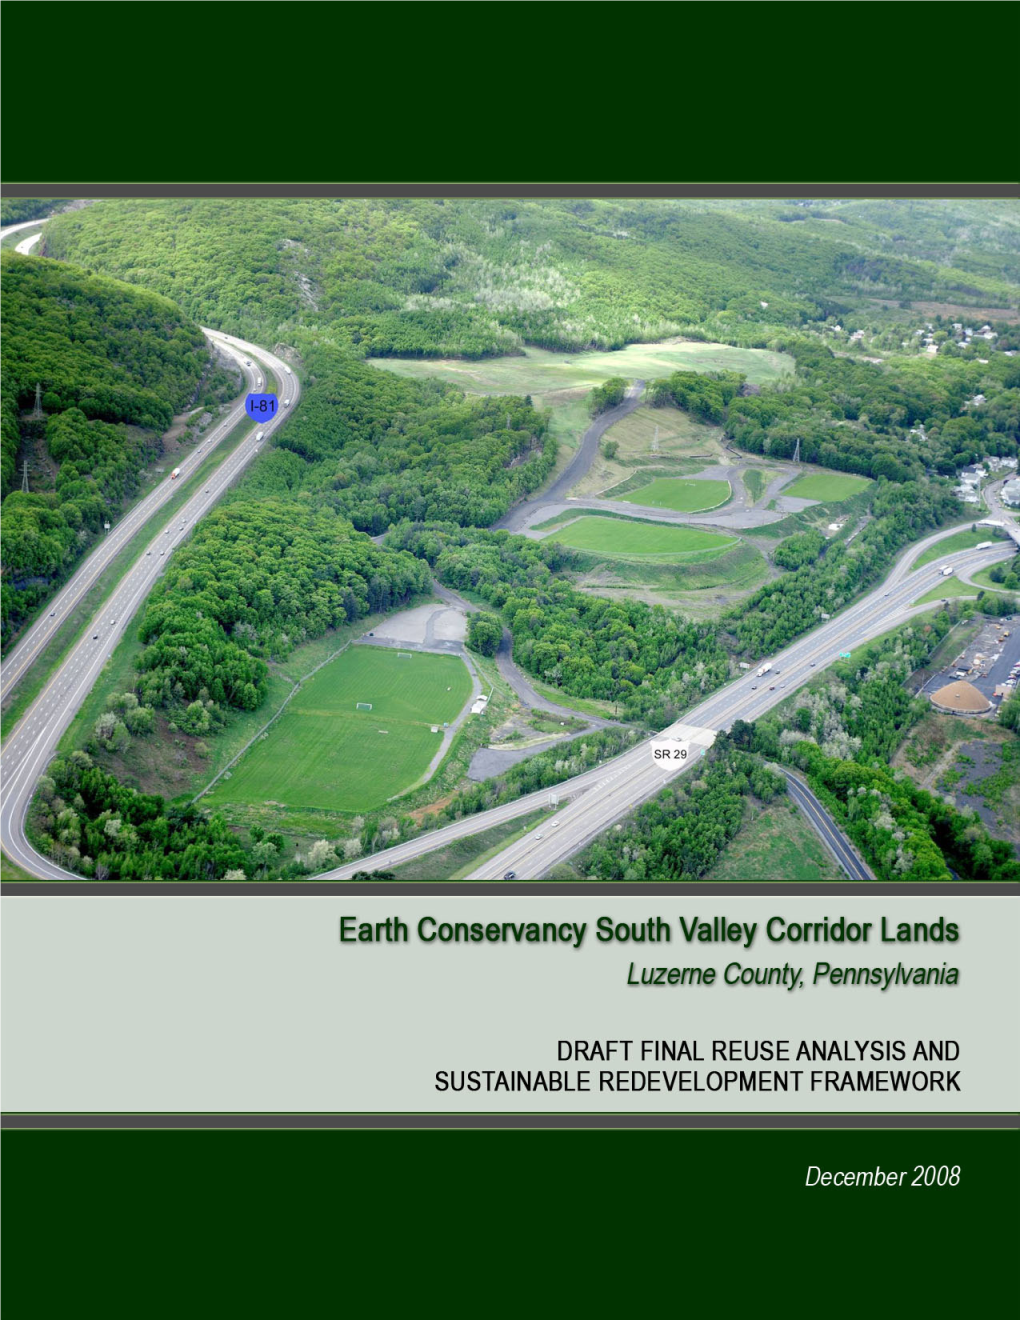 Earth Conservancy South Valley Corridor Lands, Luzerne County, Pennsylvania DRAFT FINAL REUSE ANALYSIS and SUSTAINABLE REDEVELOPMENT FRAMEWORK